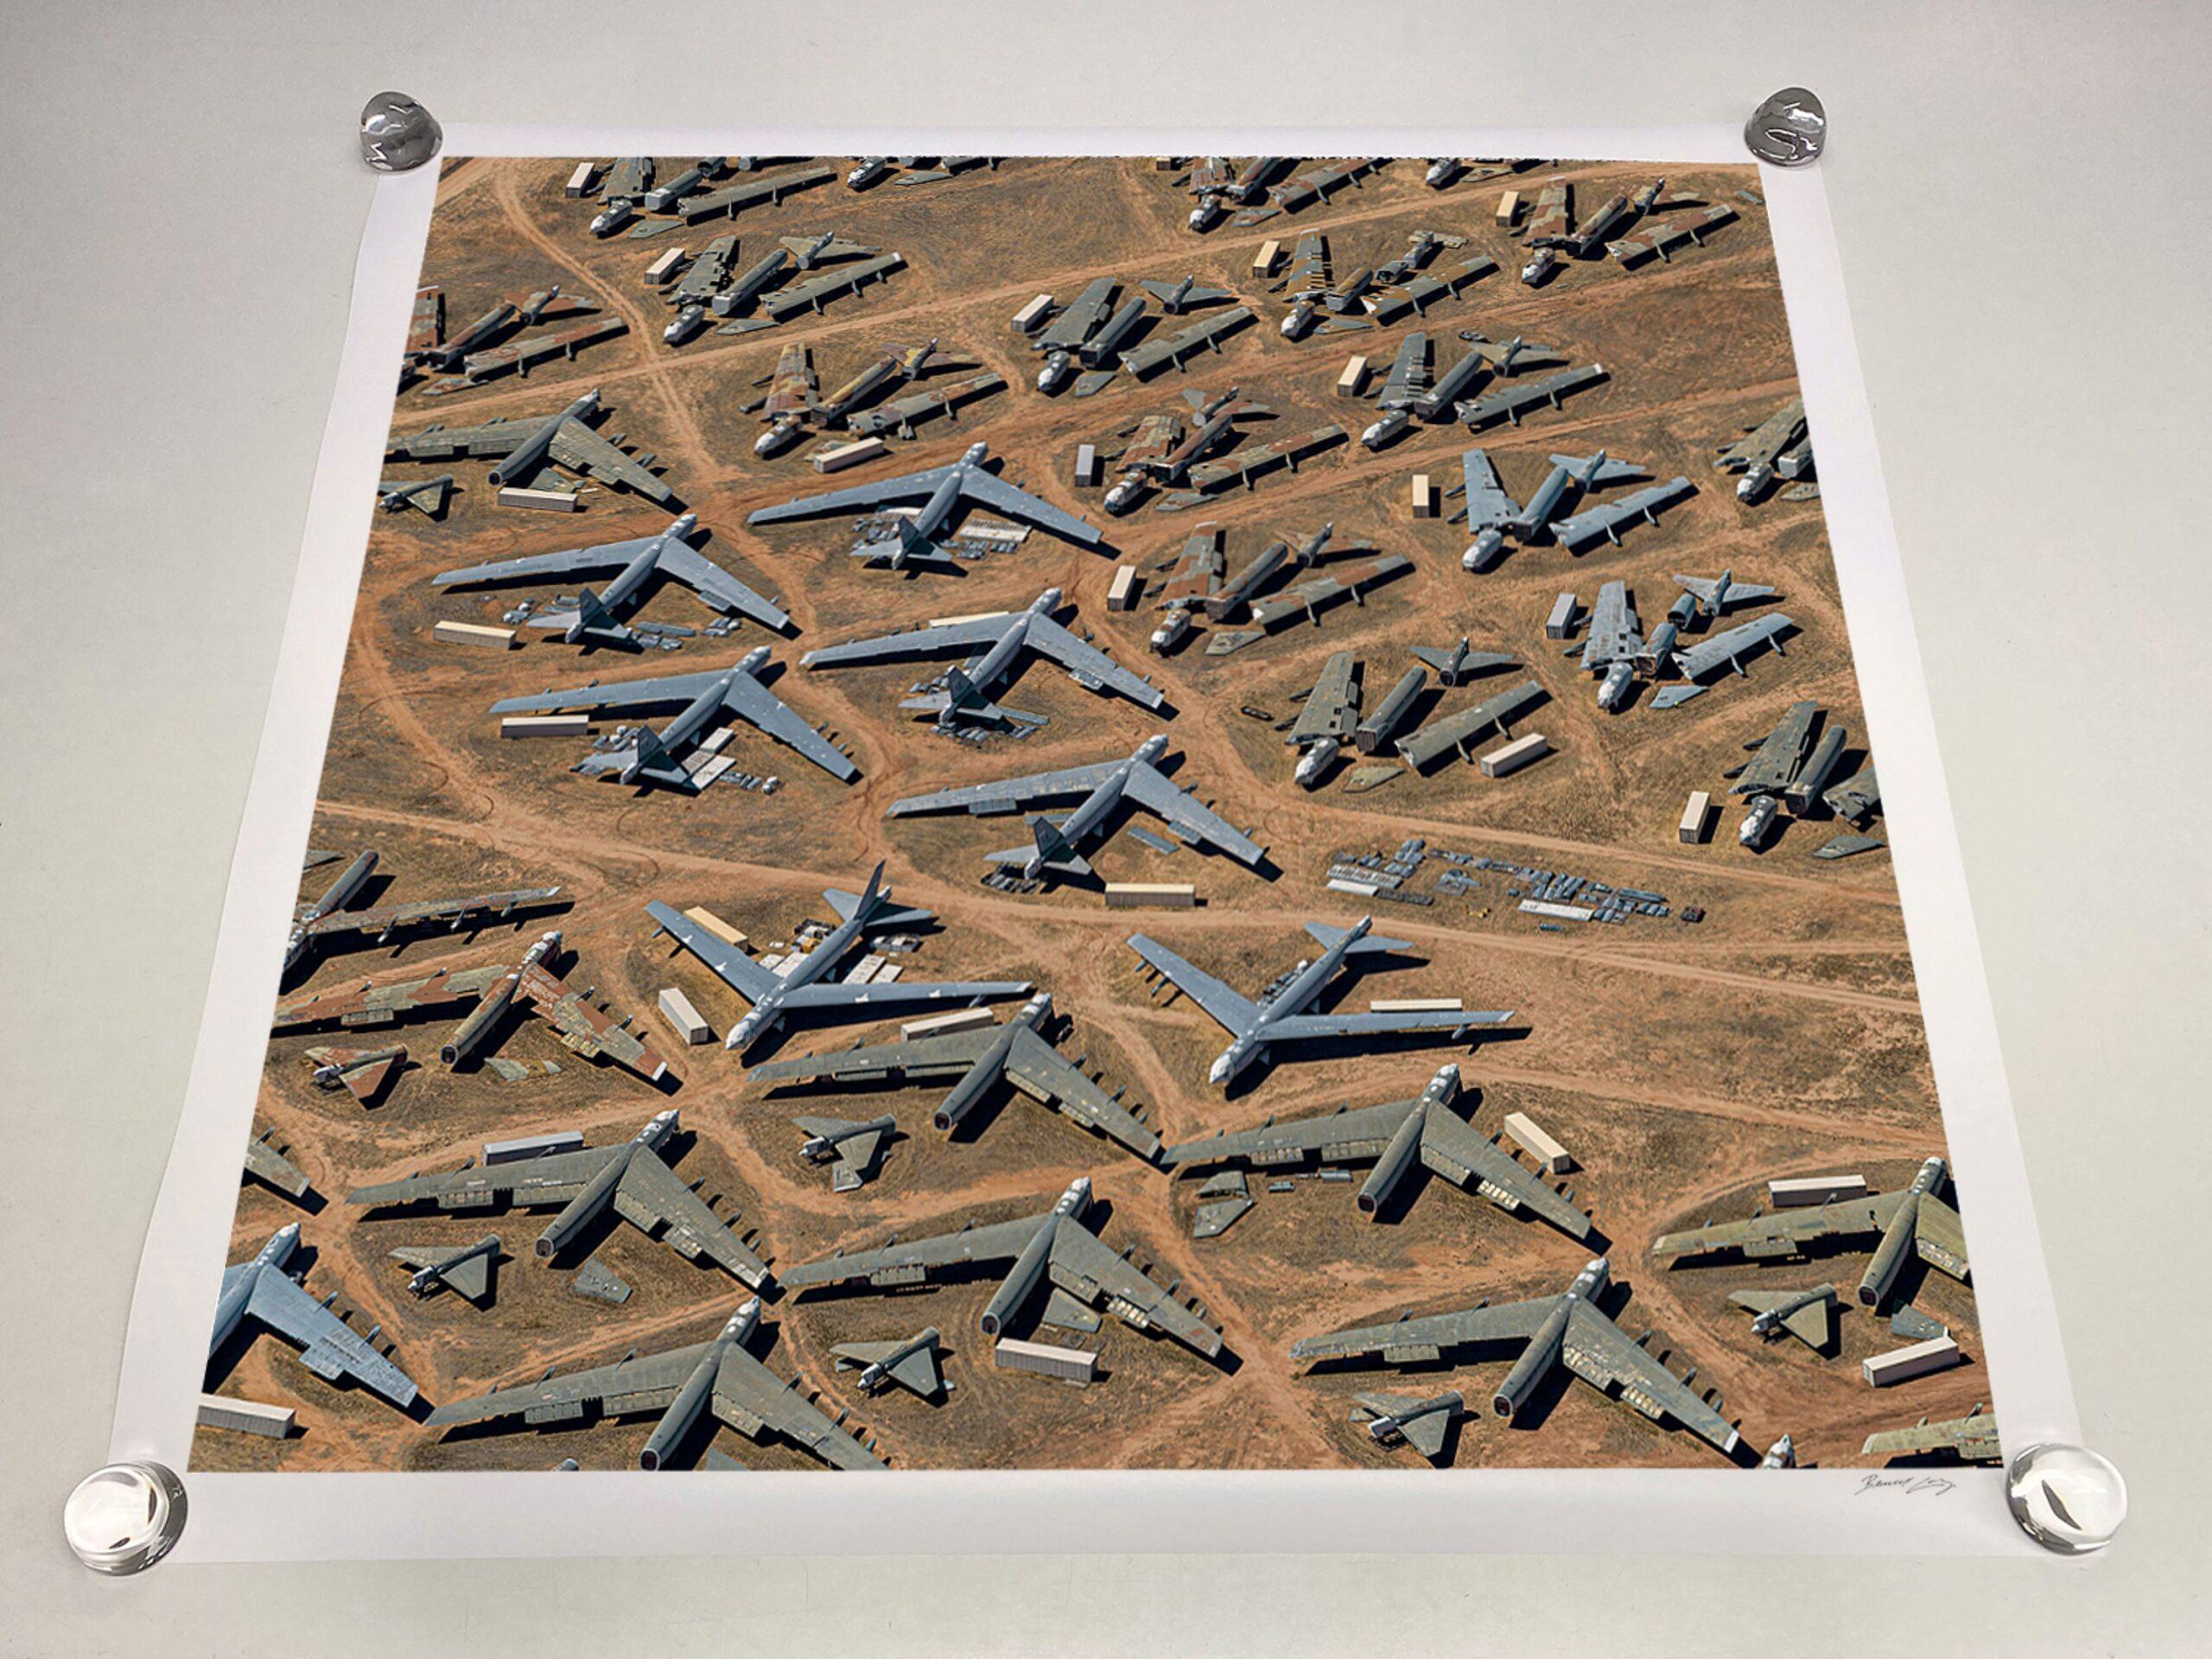 Aerial Views, Boneyard 003 by Bernhard Lang - Aerial photography, planes For Sale 2